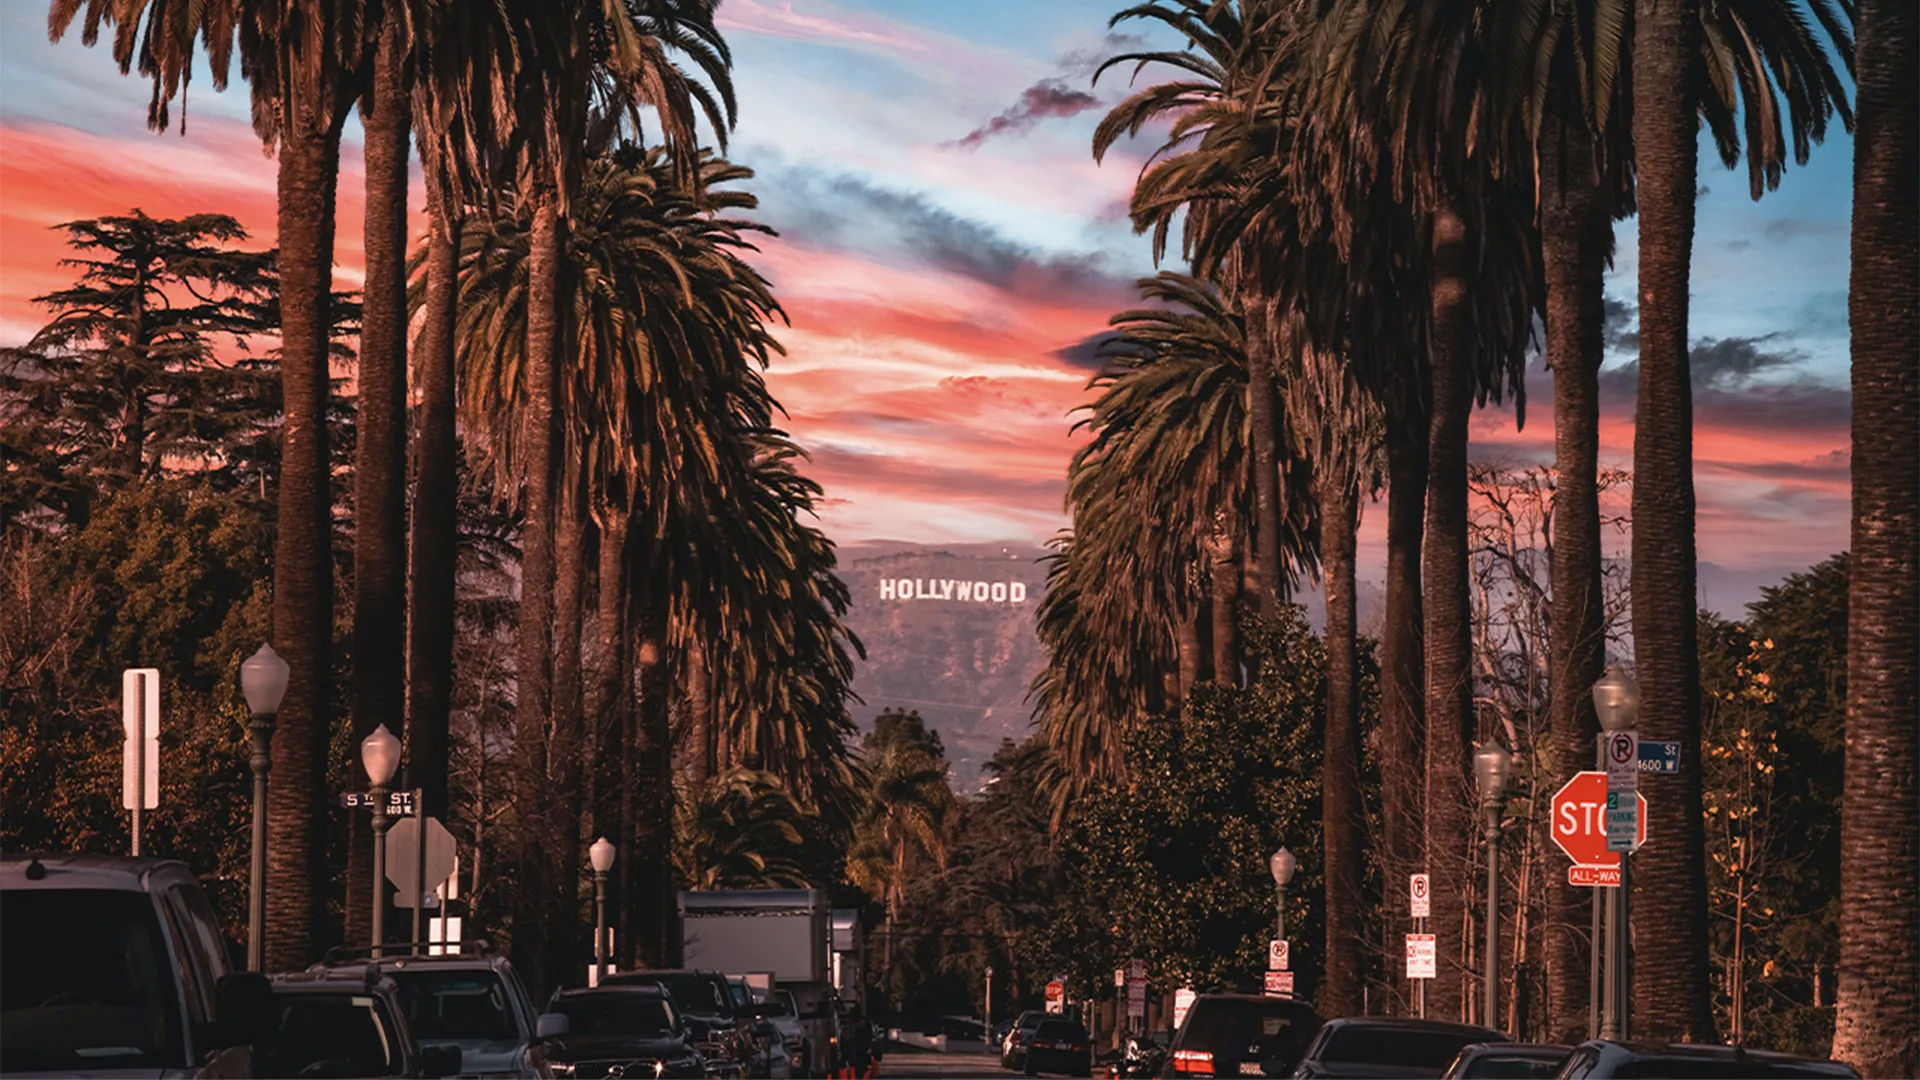 Hollywood sign in between palm trees at sunset